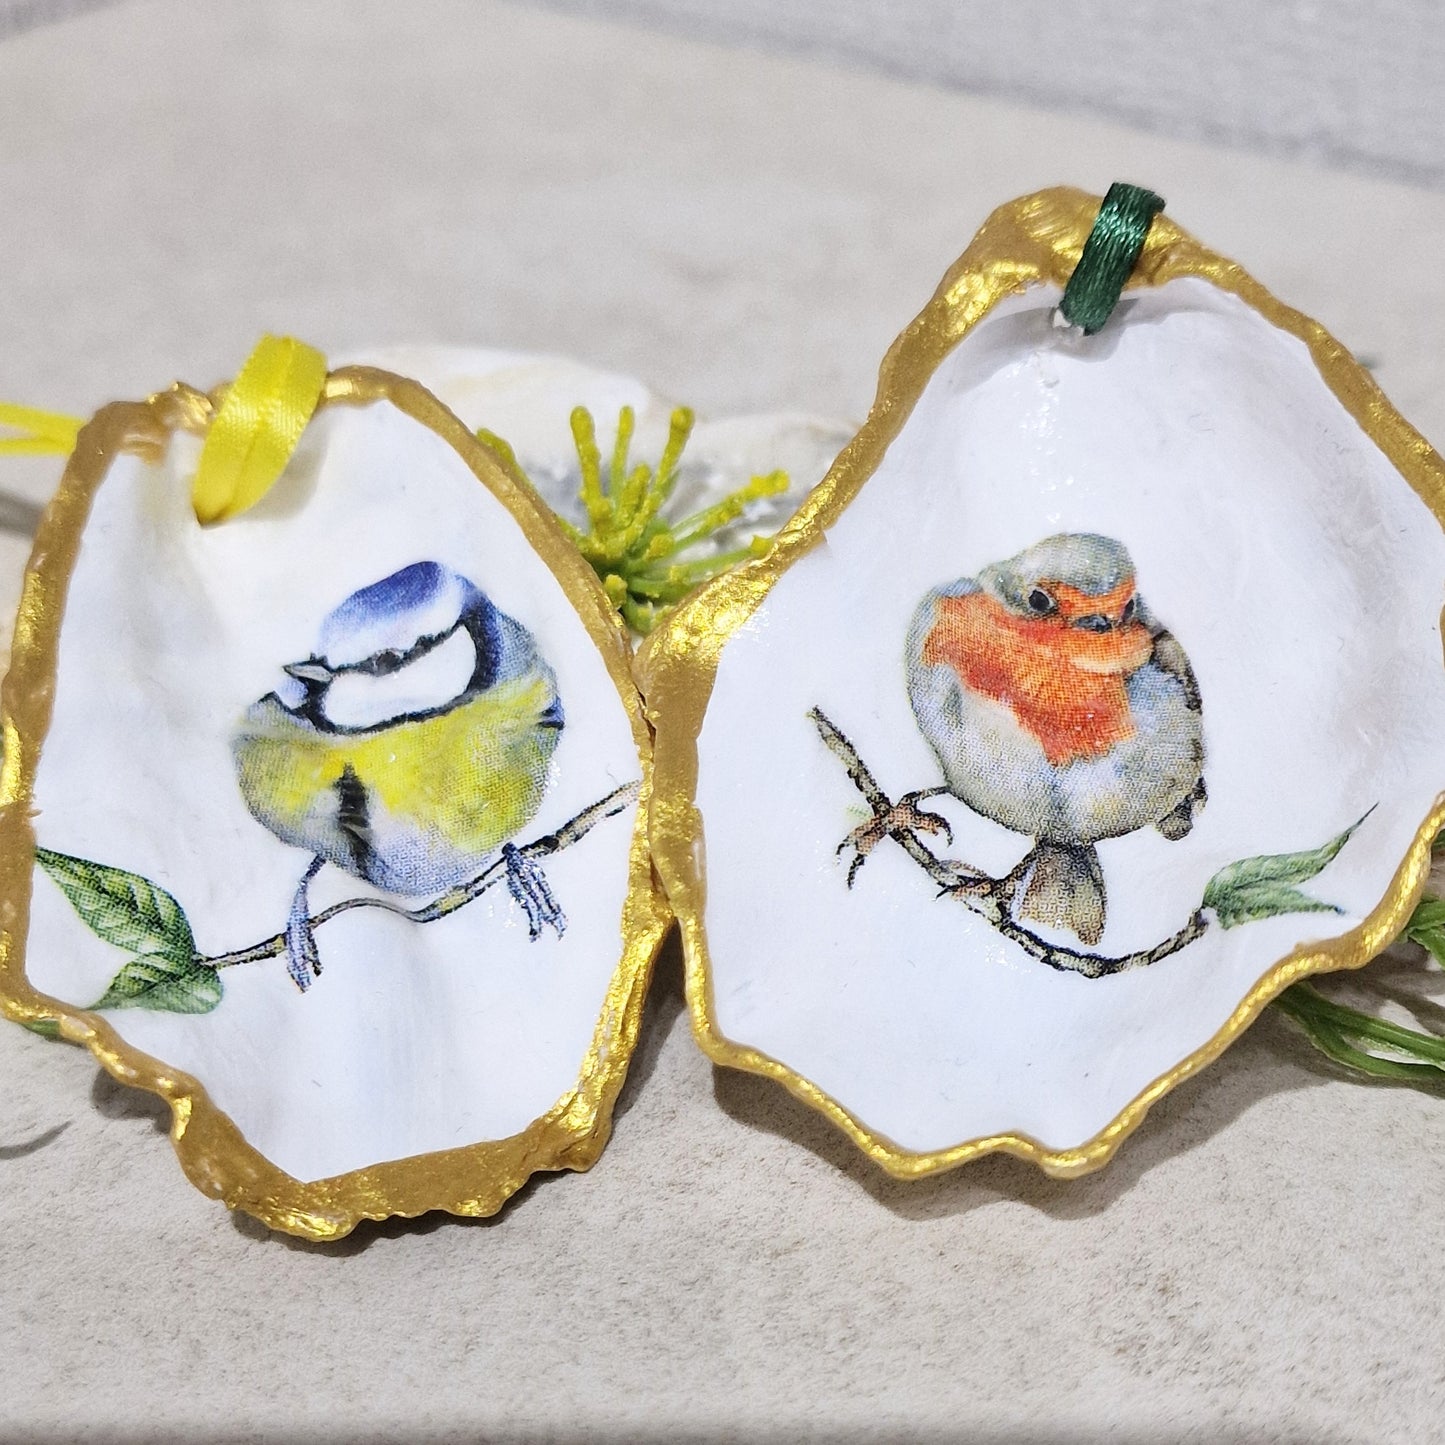 Robin & Blue Tit Birds Oyster Shell Hanging Ornaments Decorations Gift Easter Tree - Set of 2